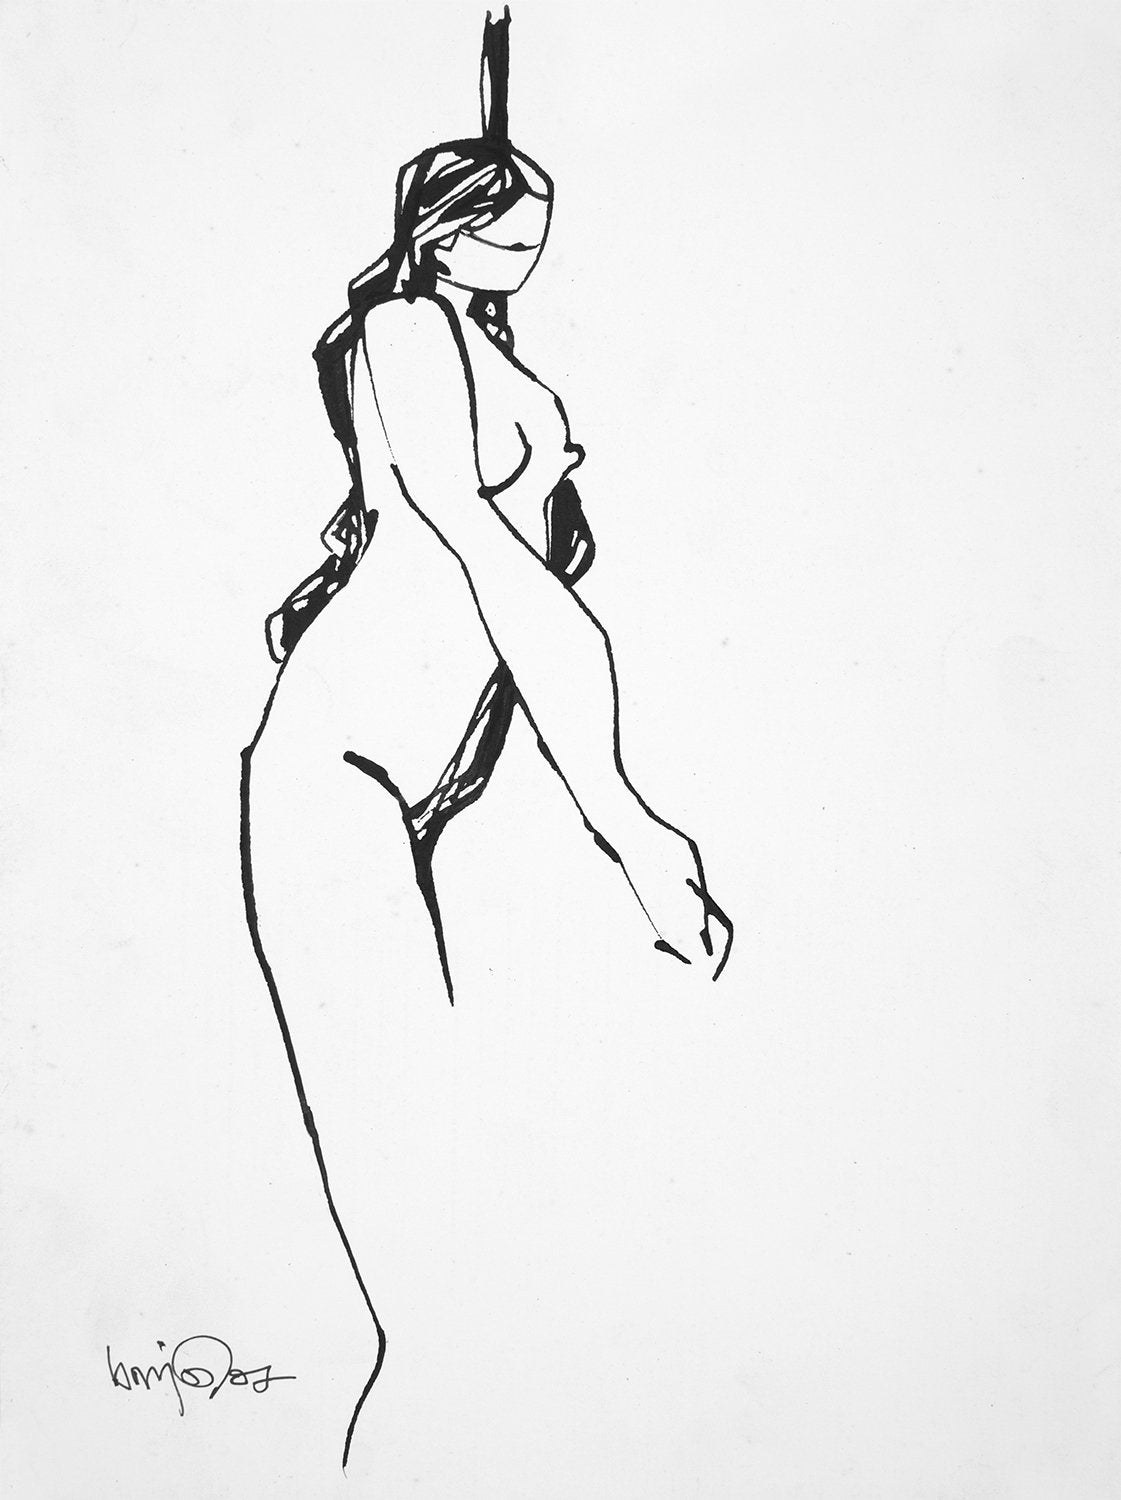 Nude 43|S. Mark Rathinaraj- Pen and Ink on Paper, , 13 x 8.5 inches